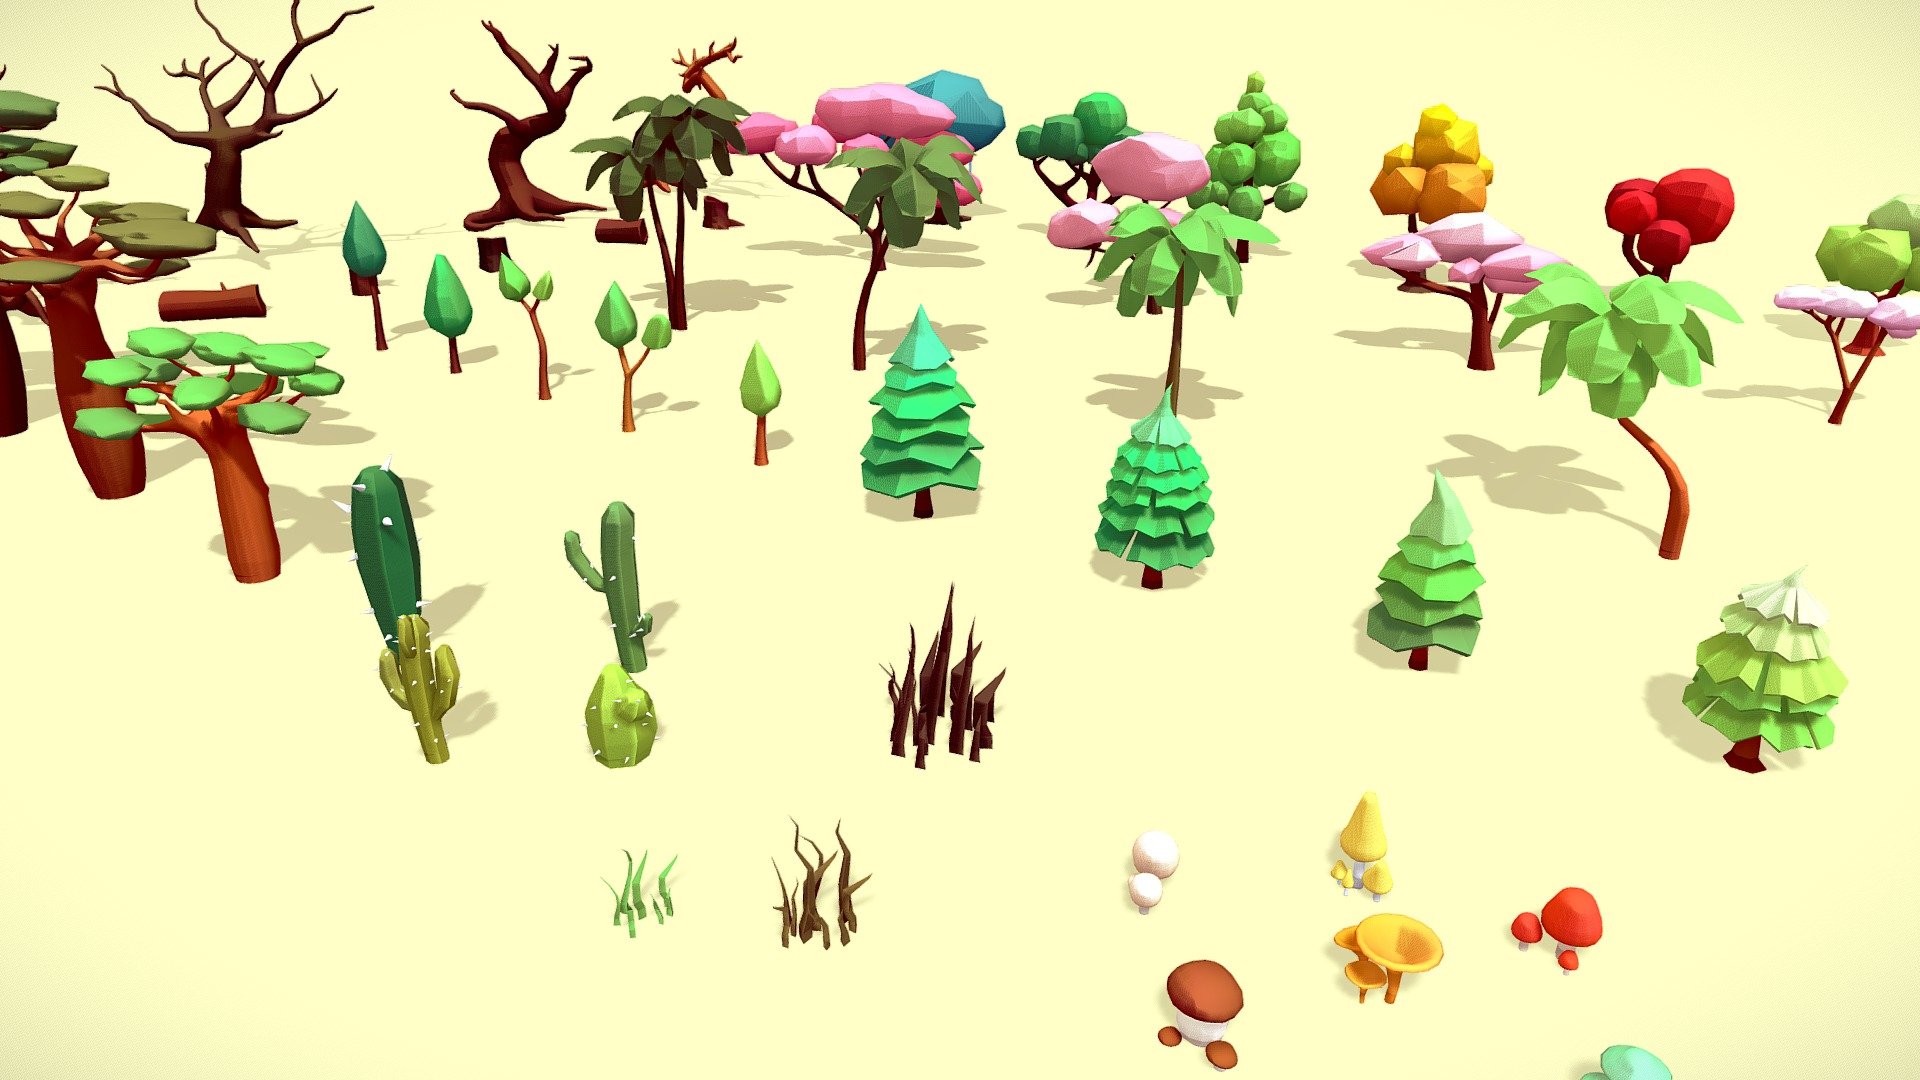 This pack is like a forest full of fun, featuring a variety of beautifully crafted, low polygonal trees that are sure to add some serious style to your work. From majestic pines to whimsical other trees, each one has its own unique personality and charm.

The low poly style gives these trees a playful, distinctive look that will make your project stand out. They’re perfect for use in video games, animations, advertisements, and more. And with compatibility for most 3D software packages, they’re easy to integrate into your work.


Collection description:
Collection: 1 files ( FBX )  + 1 full color texture ( PNG )




7 Mushrooms  ( 8570 tris ) 

3 Grass  ( 921 tris )

4 Cactus  ( 1648  tris )

3 Bao bab  ( 6616 tris )

9 Spicy pine  ( 4148 tris )

4 Coconut tree  ( 2857 tris )

4 Cherry blossom  ( 5466 tris )

7 Trees  ( 6708 tris )

5 Dry log  ( 1452 tris )

4 Dry Trees  ( 23497 tris )


Hope to receive everyone’s support and receive many suggestions to improve the product better. Thank - Trees lowpoy - Evironment pack - Buy Royalty Free 3D model by DuNguyn - Assets store (@nguyenvuduc2000) 3d model